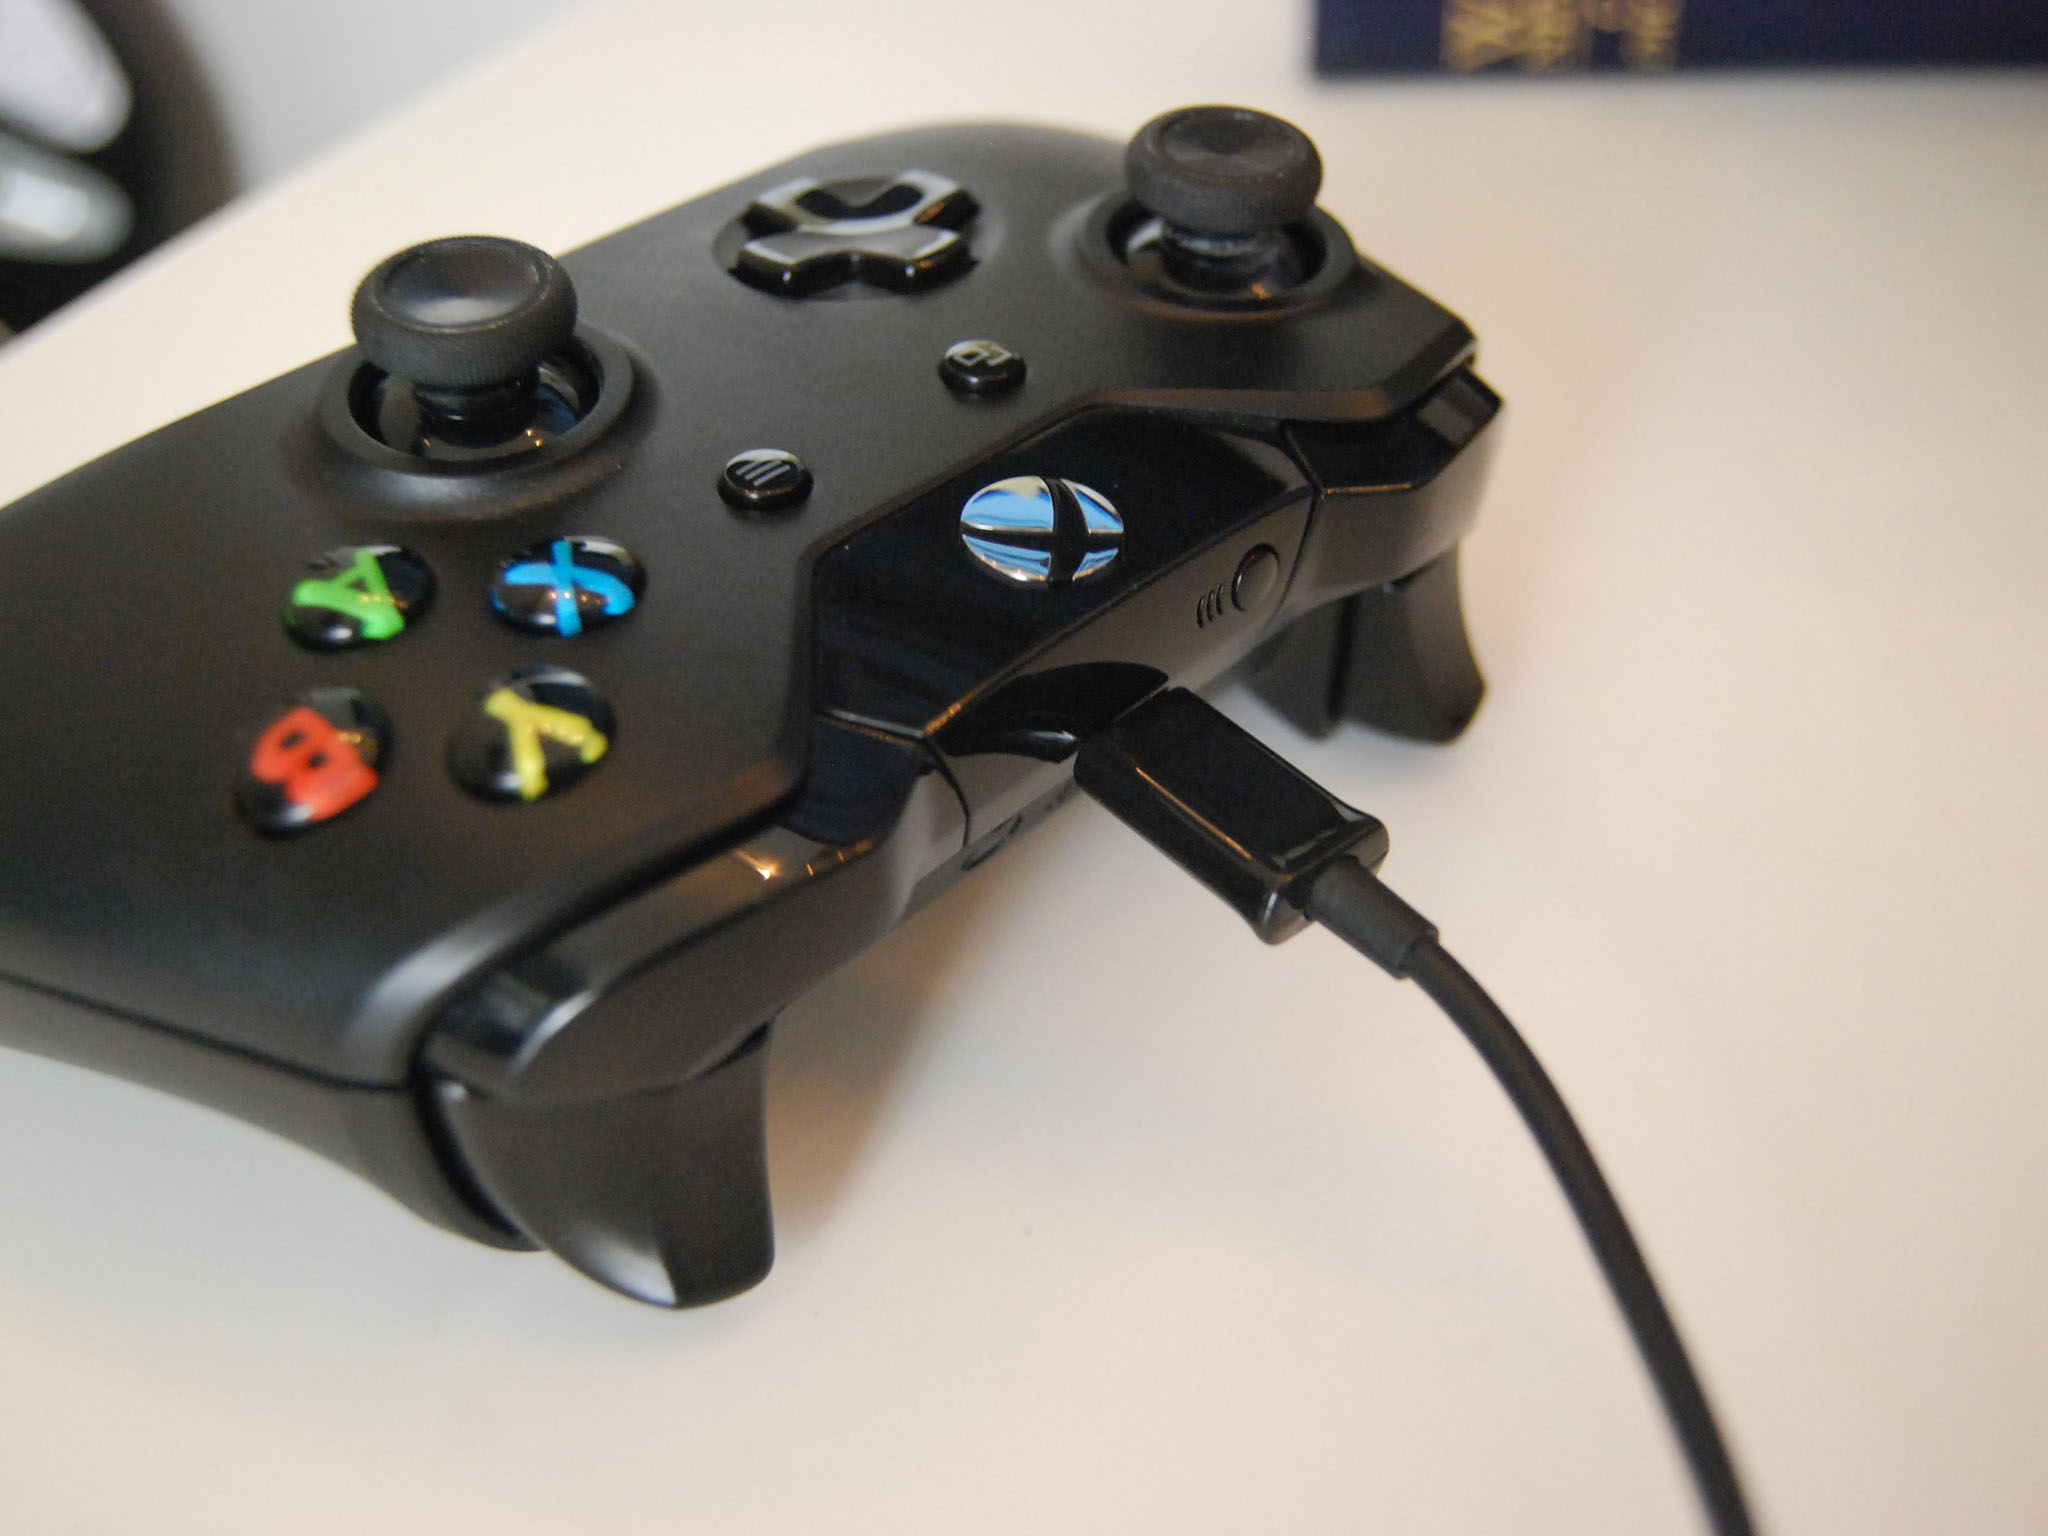 How to connect your Xbox One controller to your Mac